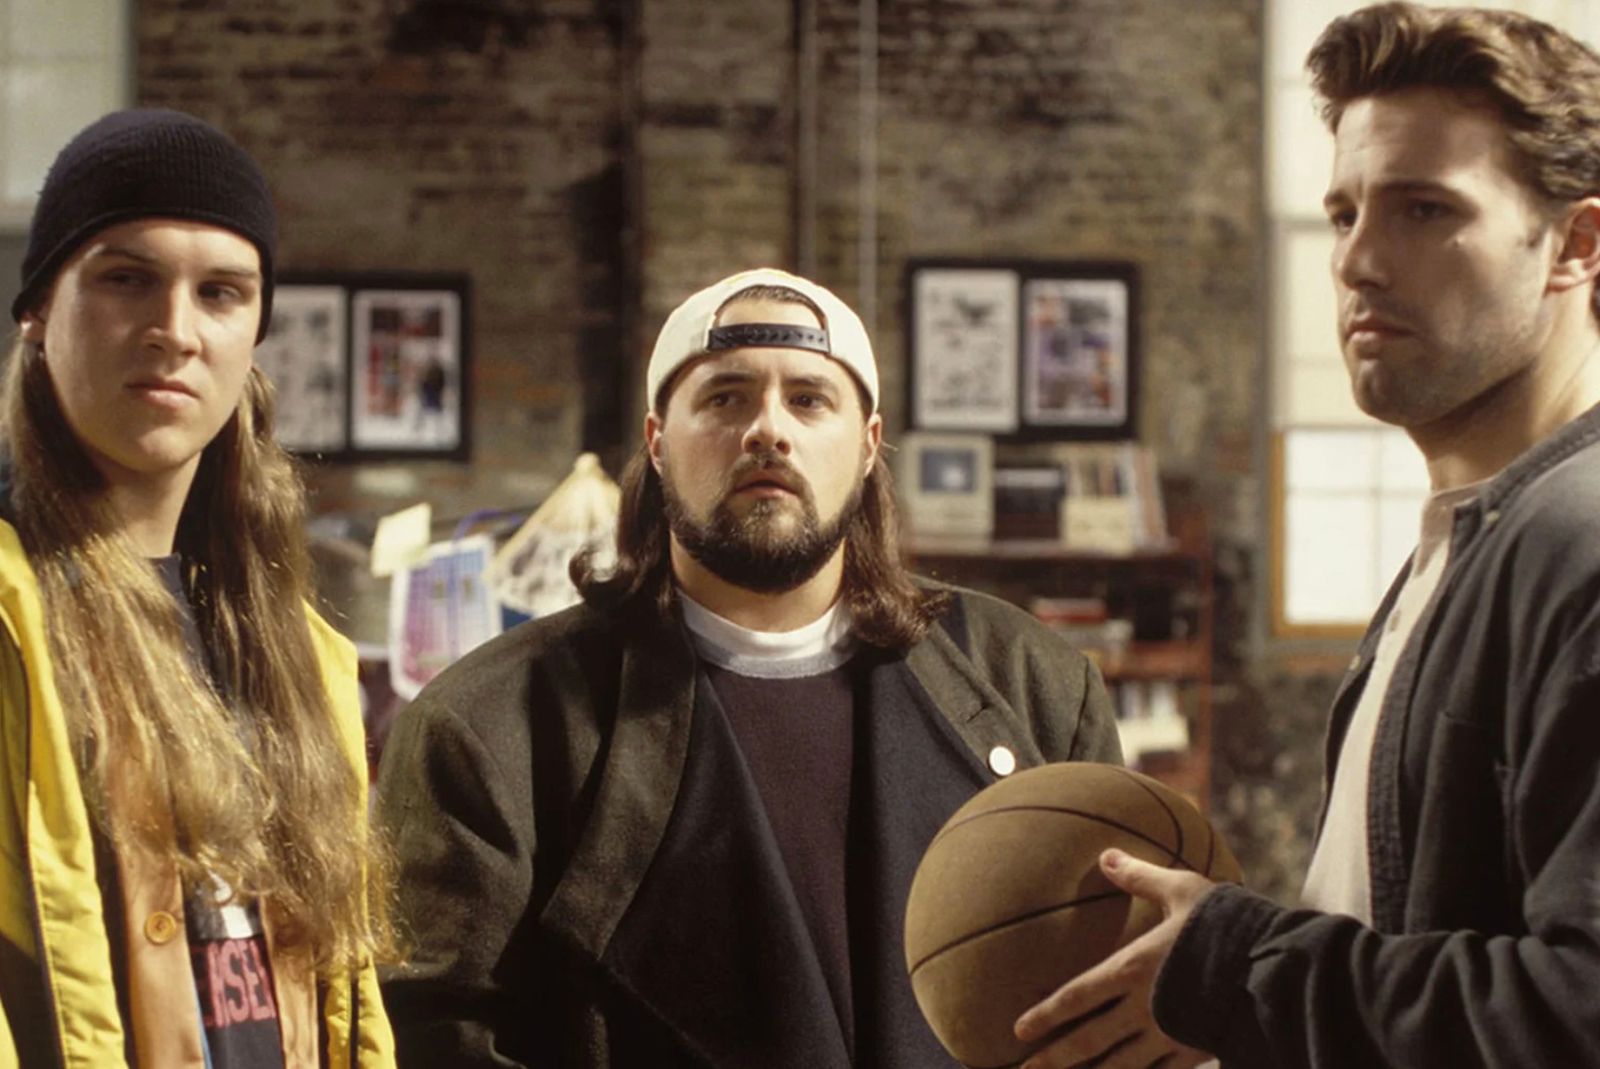 View Askewniverse movie order: Watch every Kevin Smith movie in chronological order photo 12